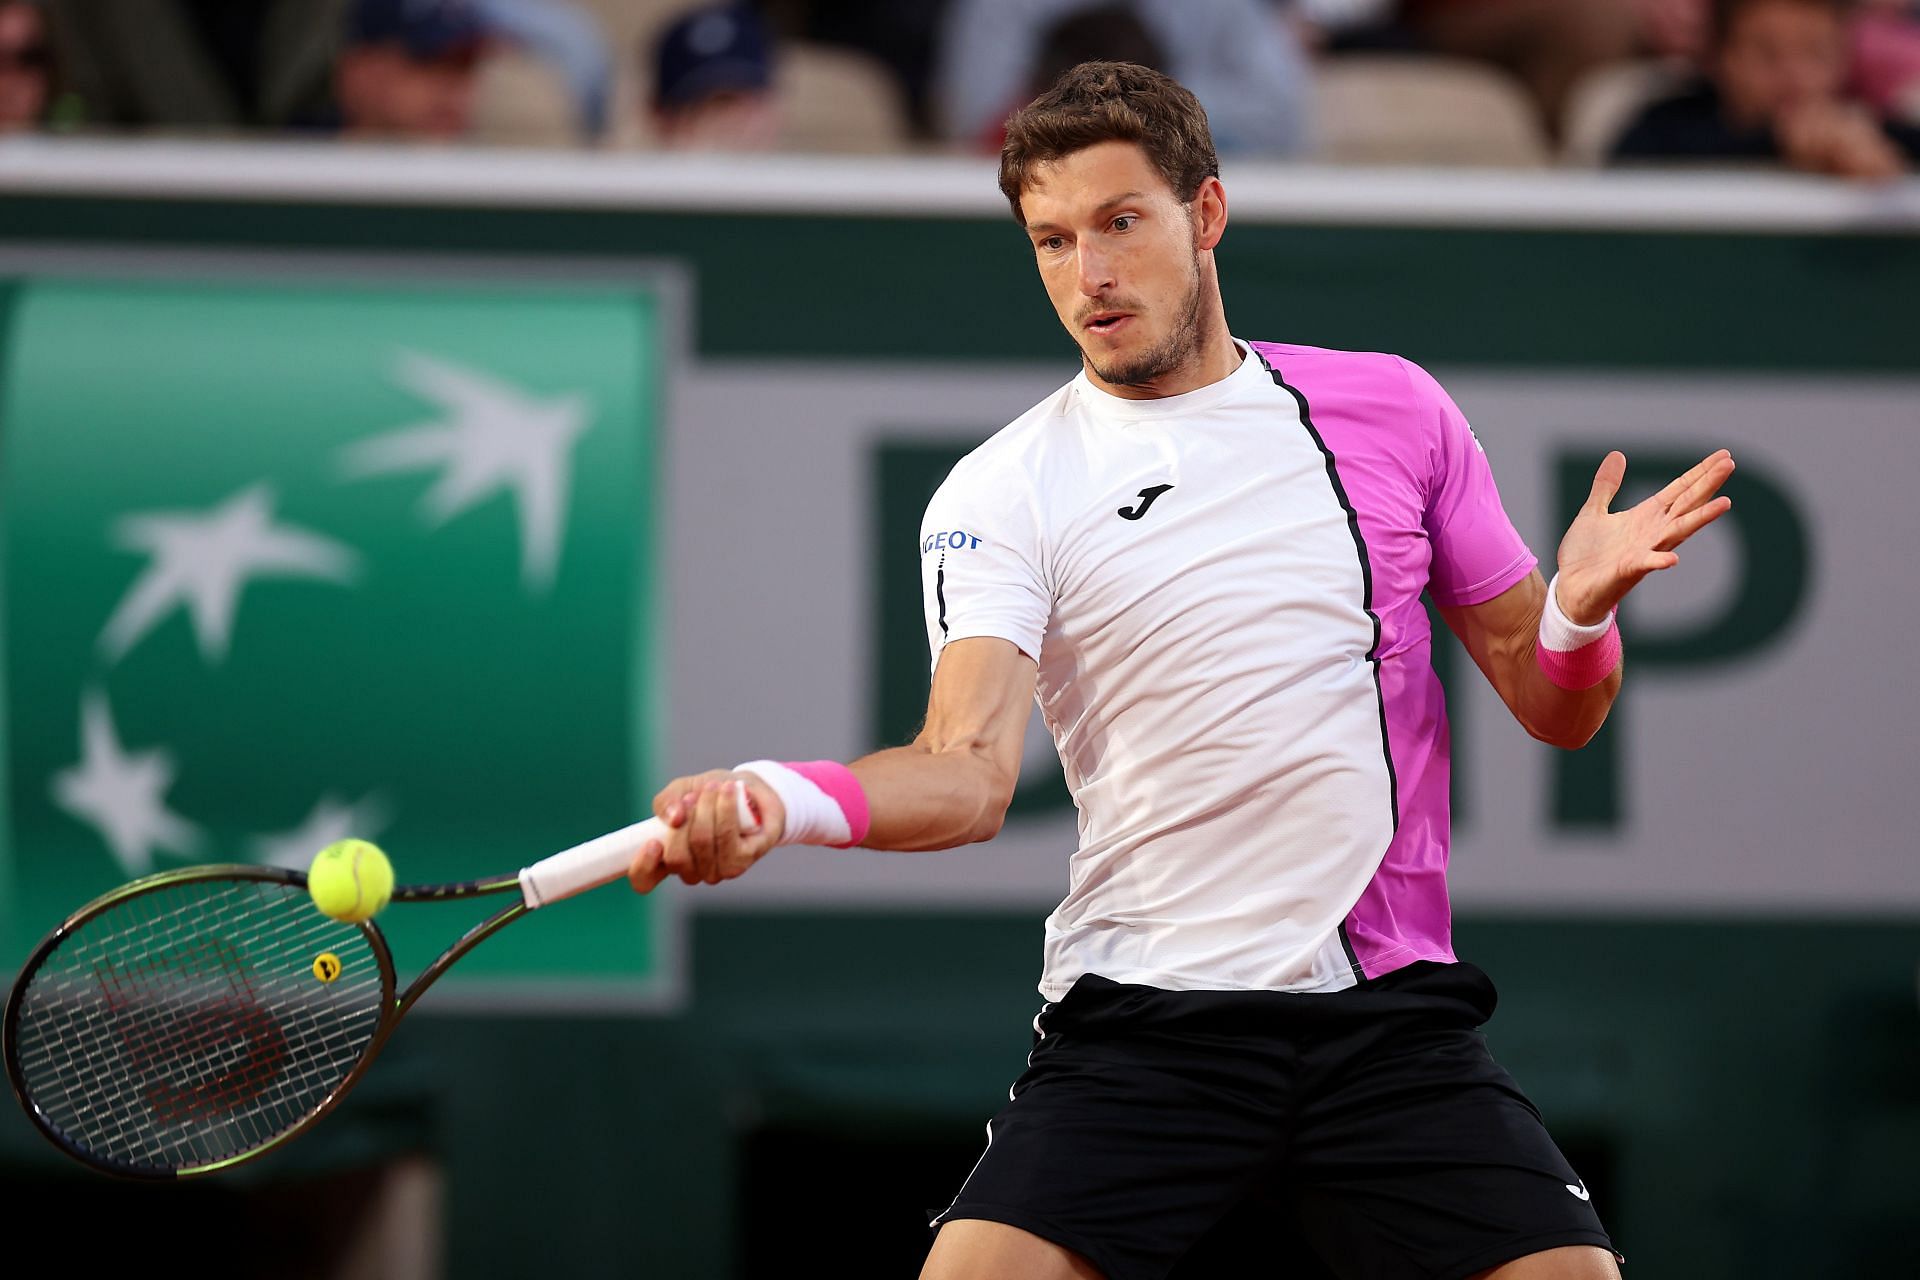 Pablo Carreno Busta plays a forehand against Gilles Simon at the 2022 French Open